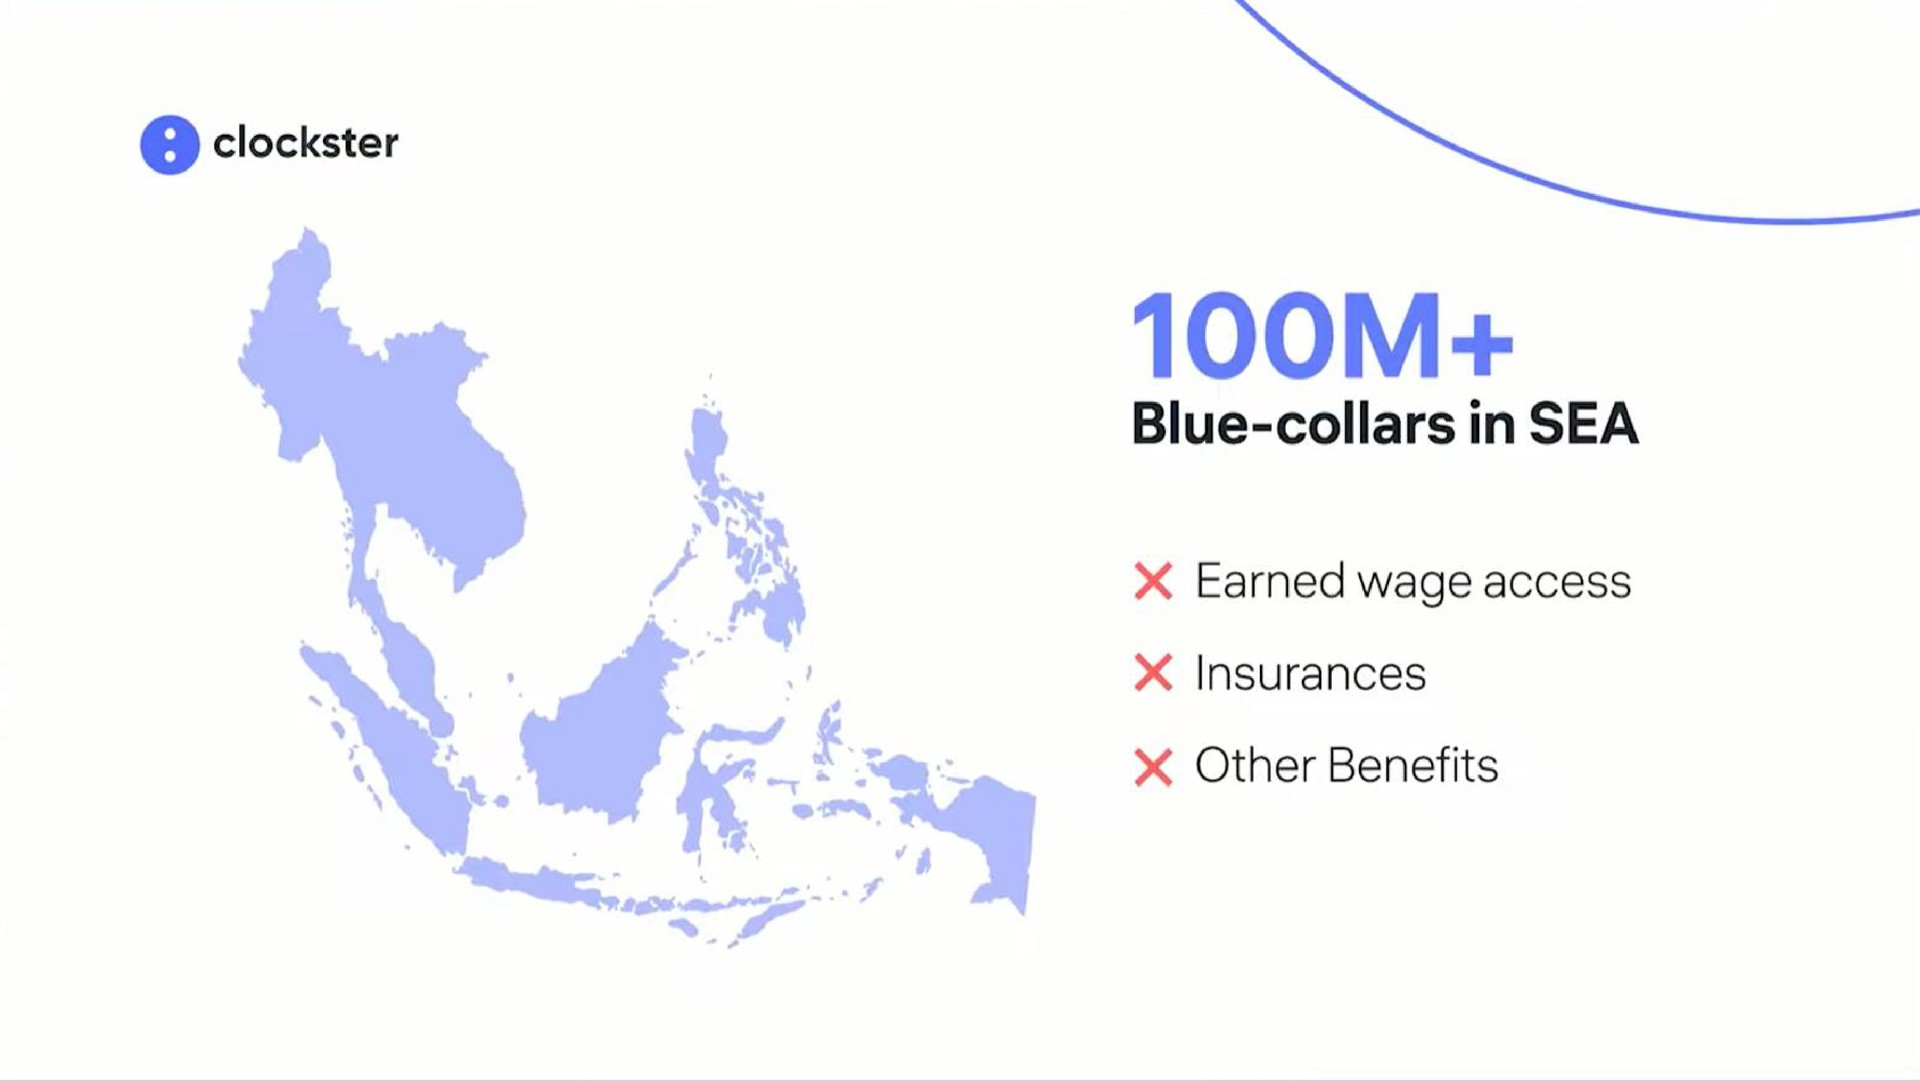 blue collars in sea earned wage access insurances other benefits | Clockster